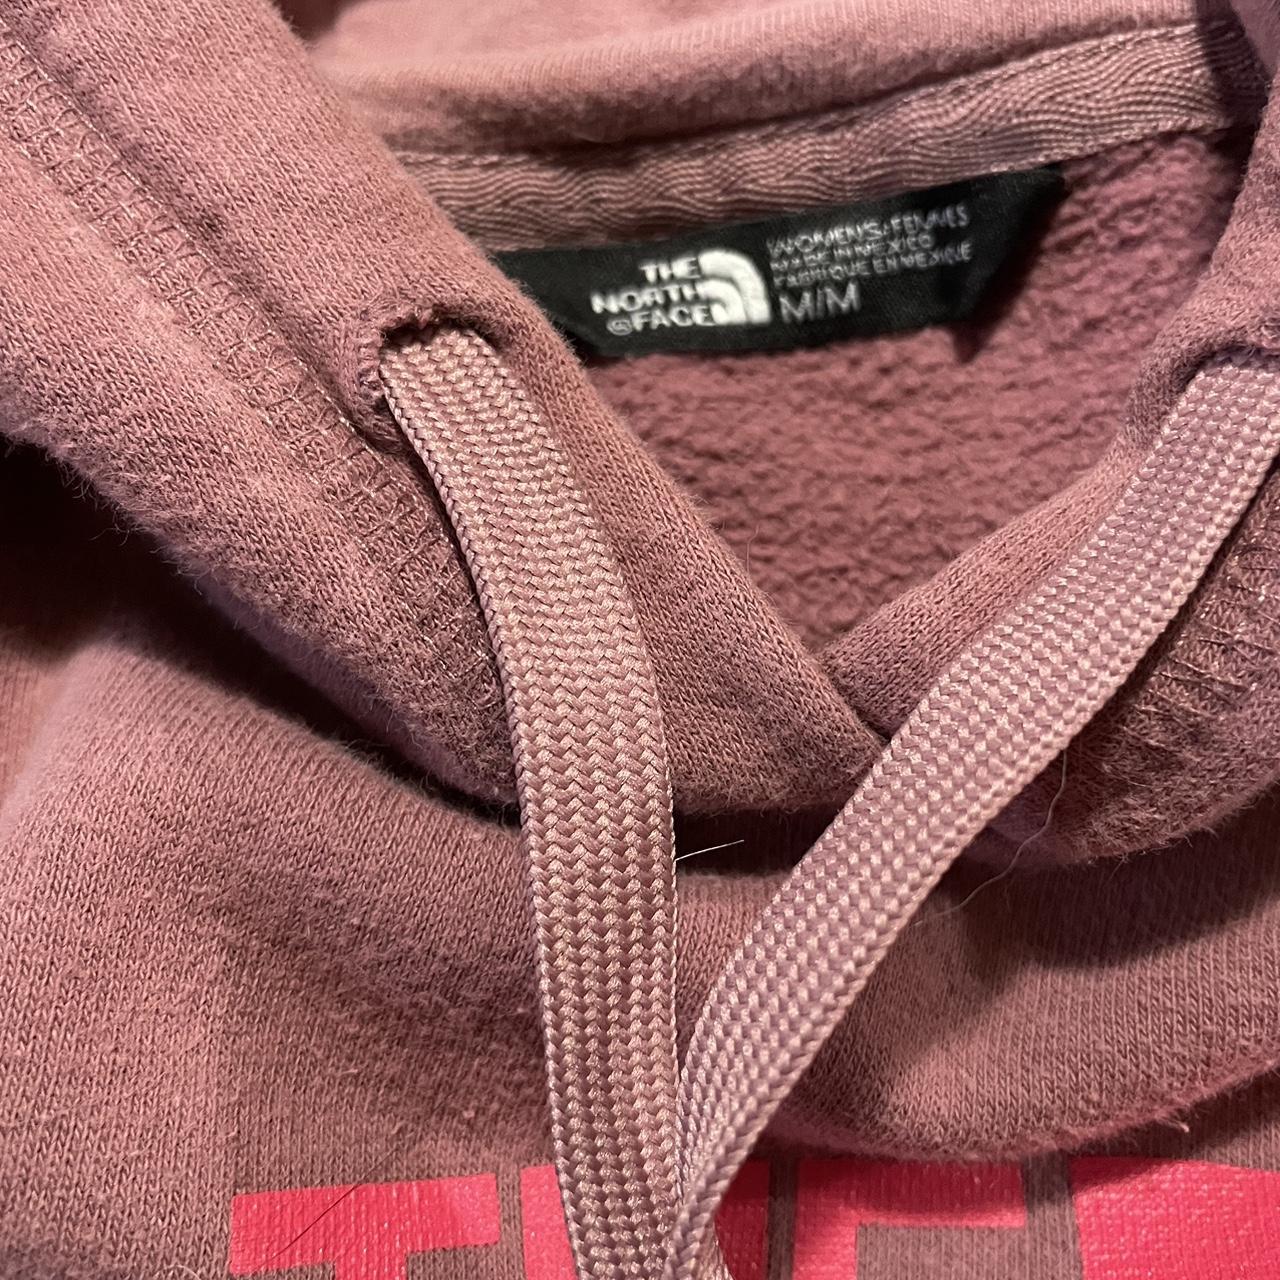 The North Face Women's Pink and White Hoodie (3)